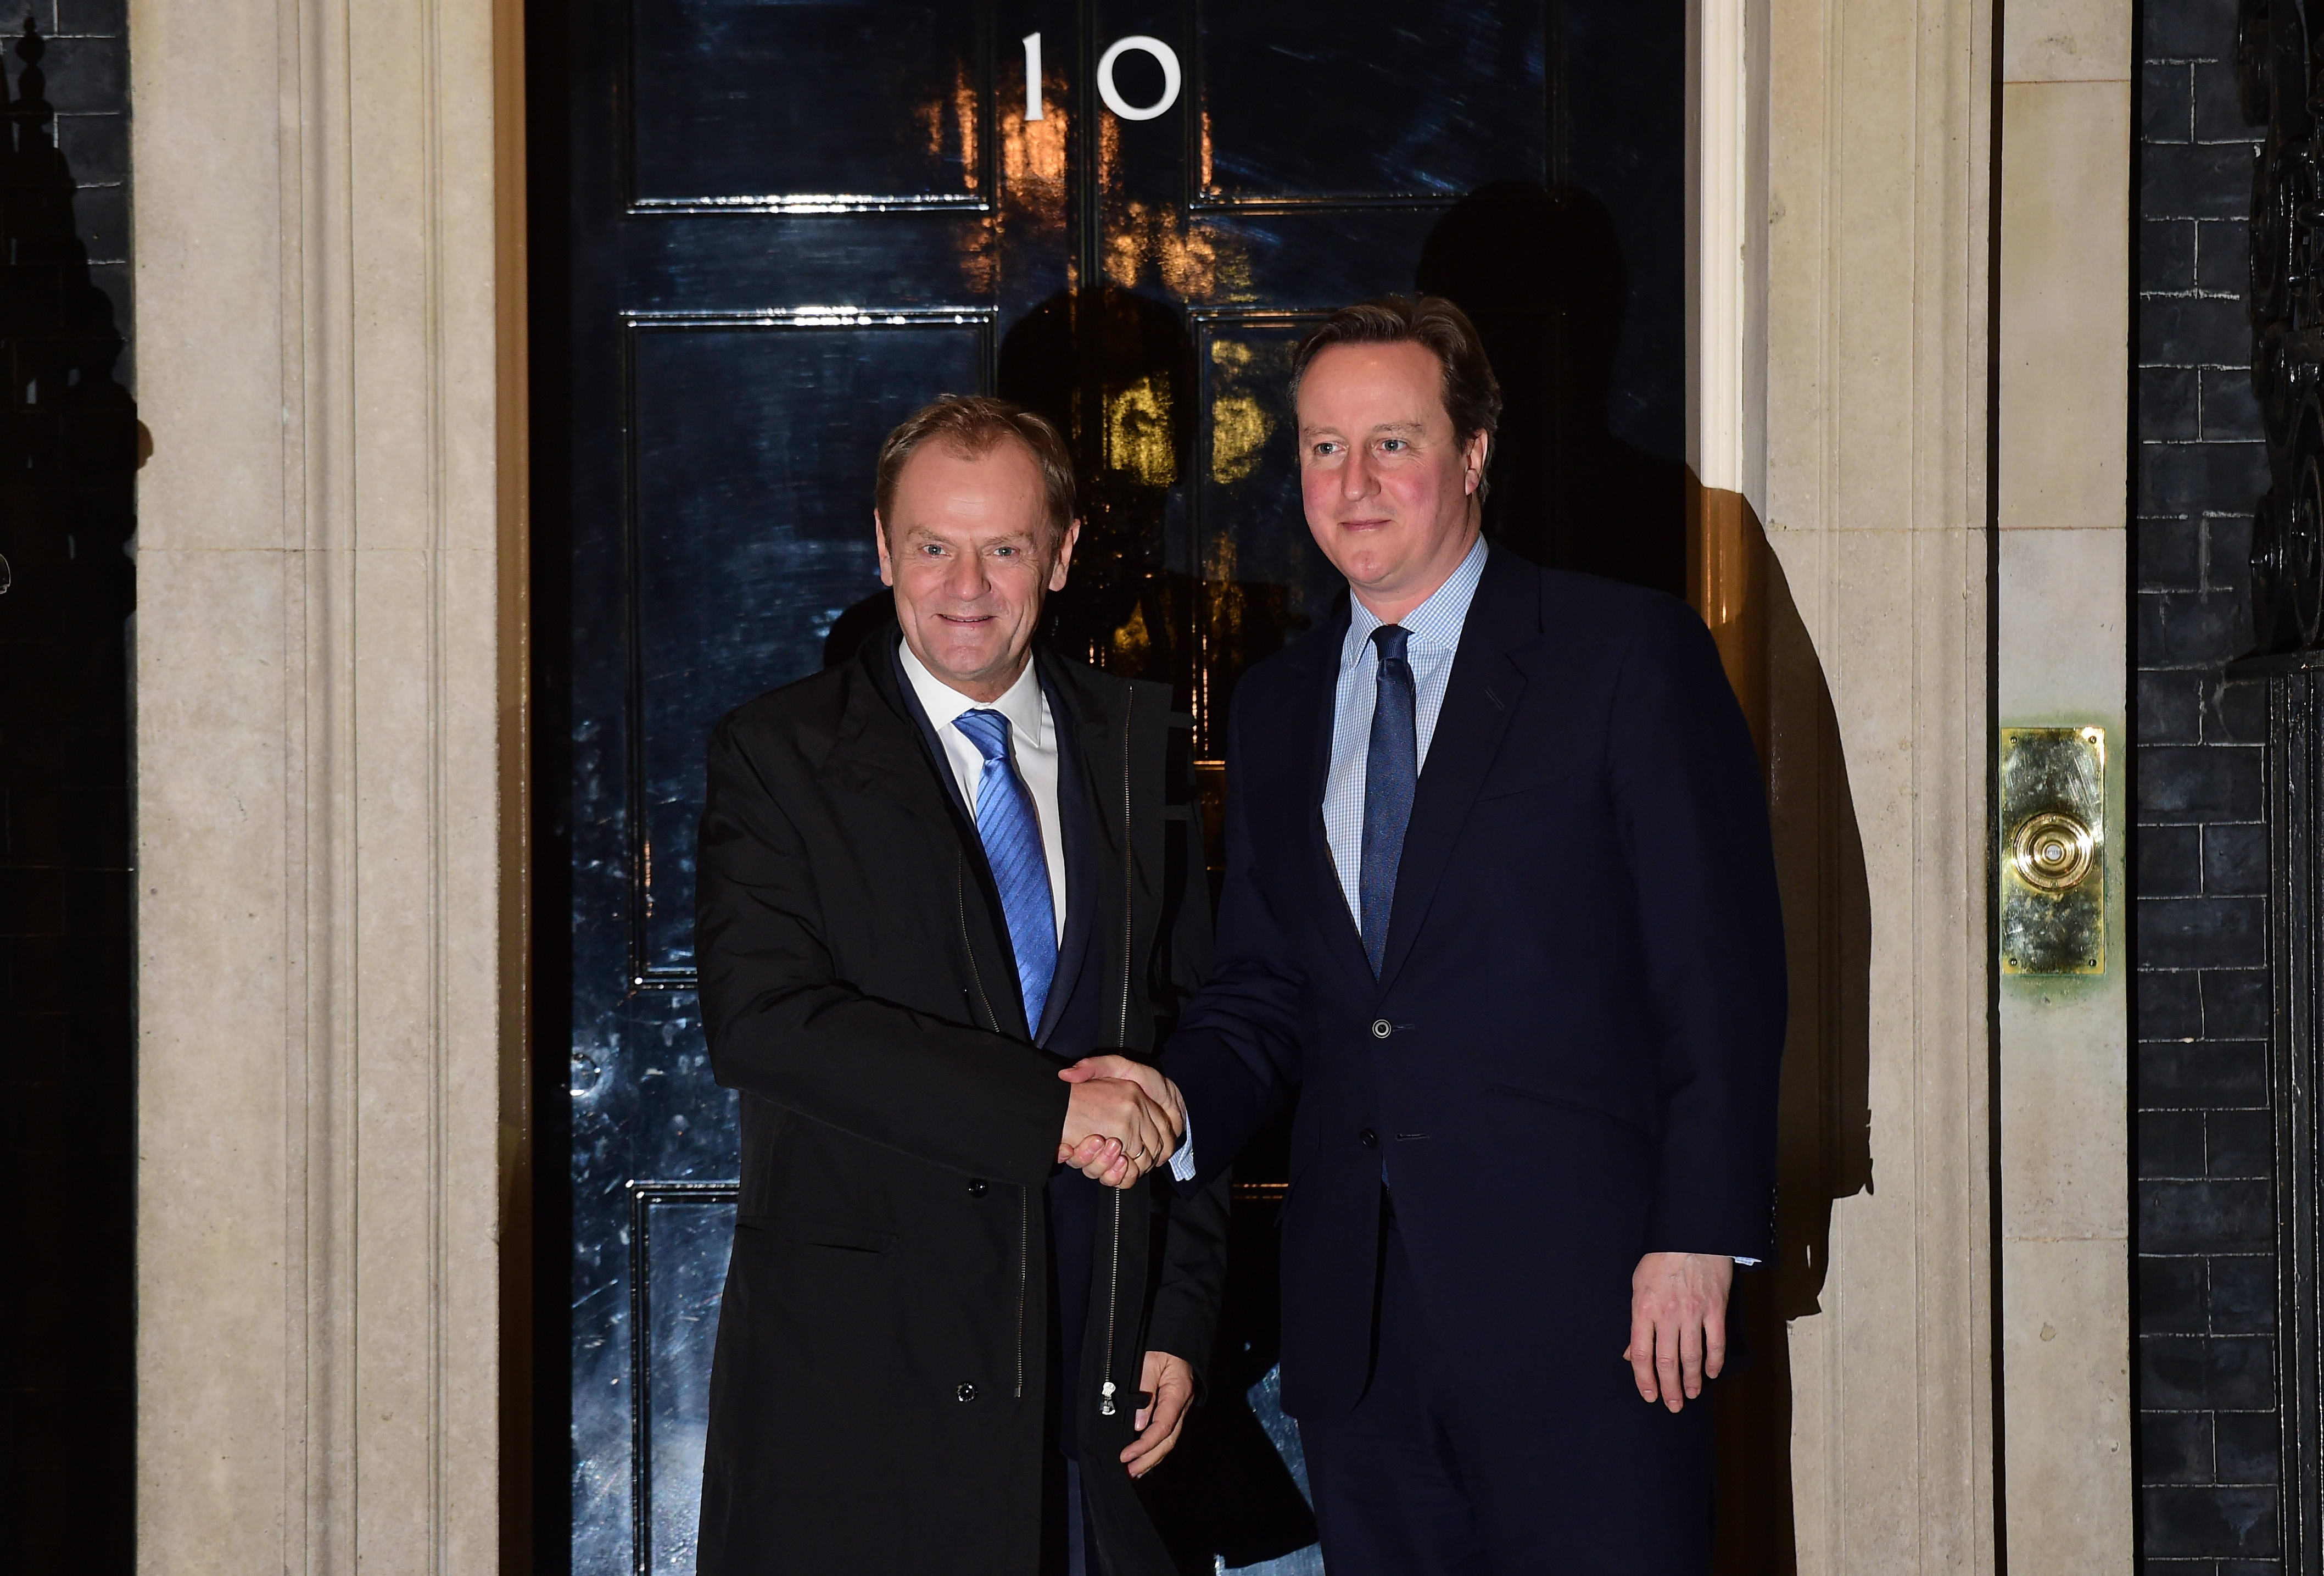 British Prime Minister David Cameron, right, with European Council president Donald Tusk outside 10 Downing Street in central London on 31 January 2016.